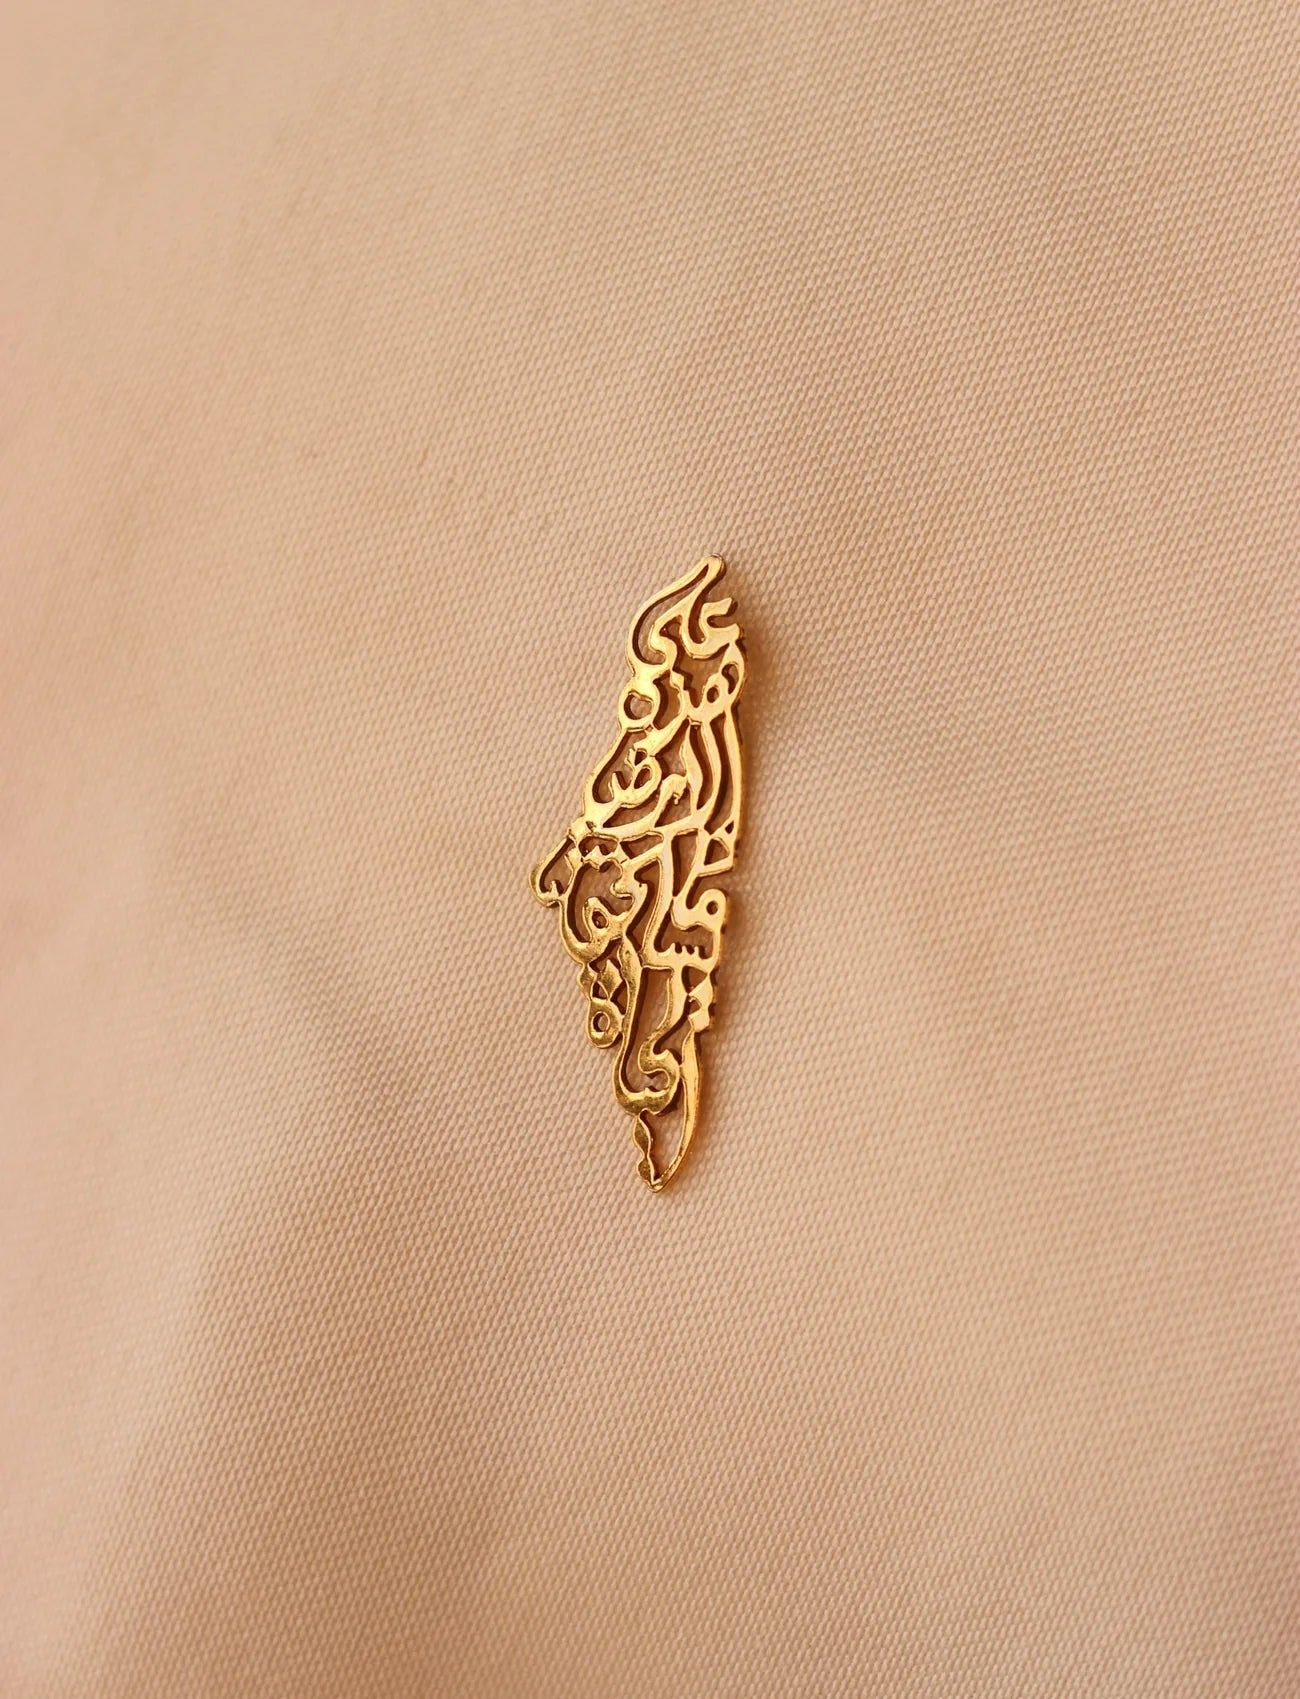 TCB-Pin(Palestine map with Palestinian famous poem written inside)Gold